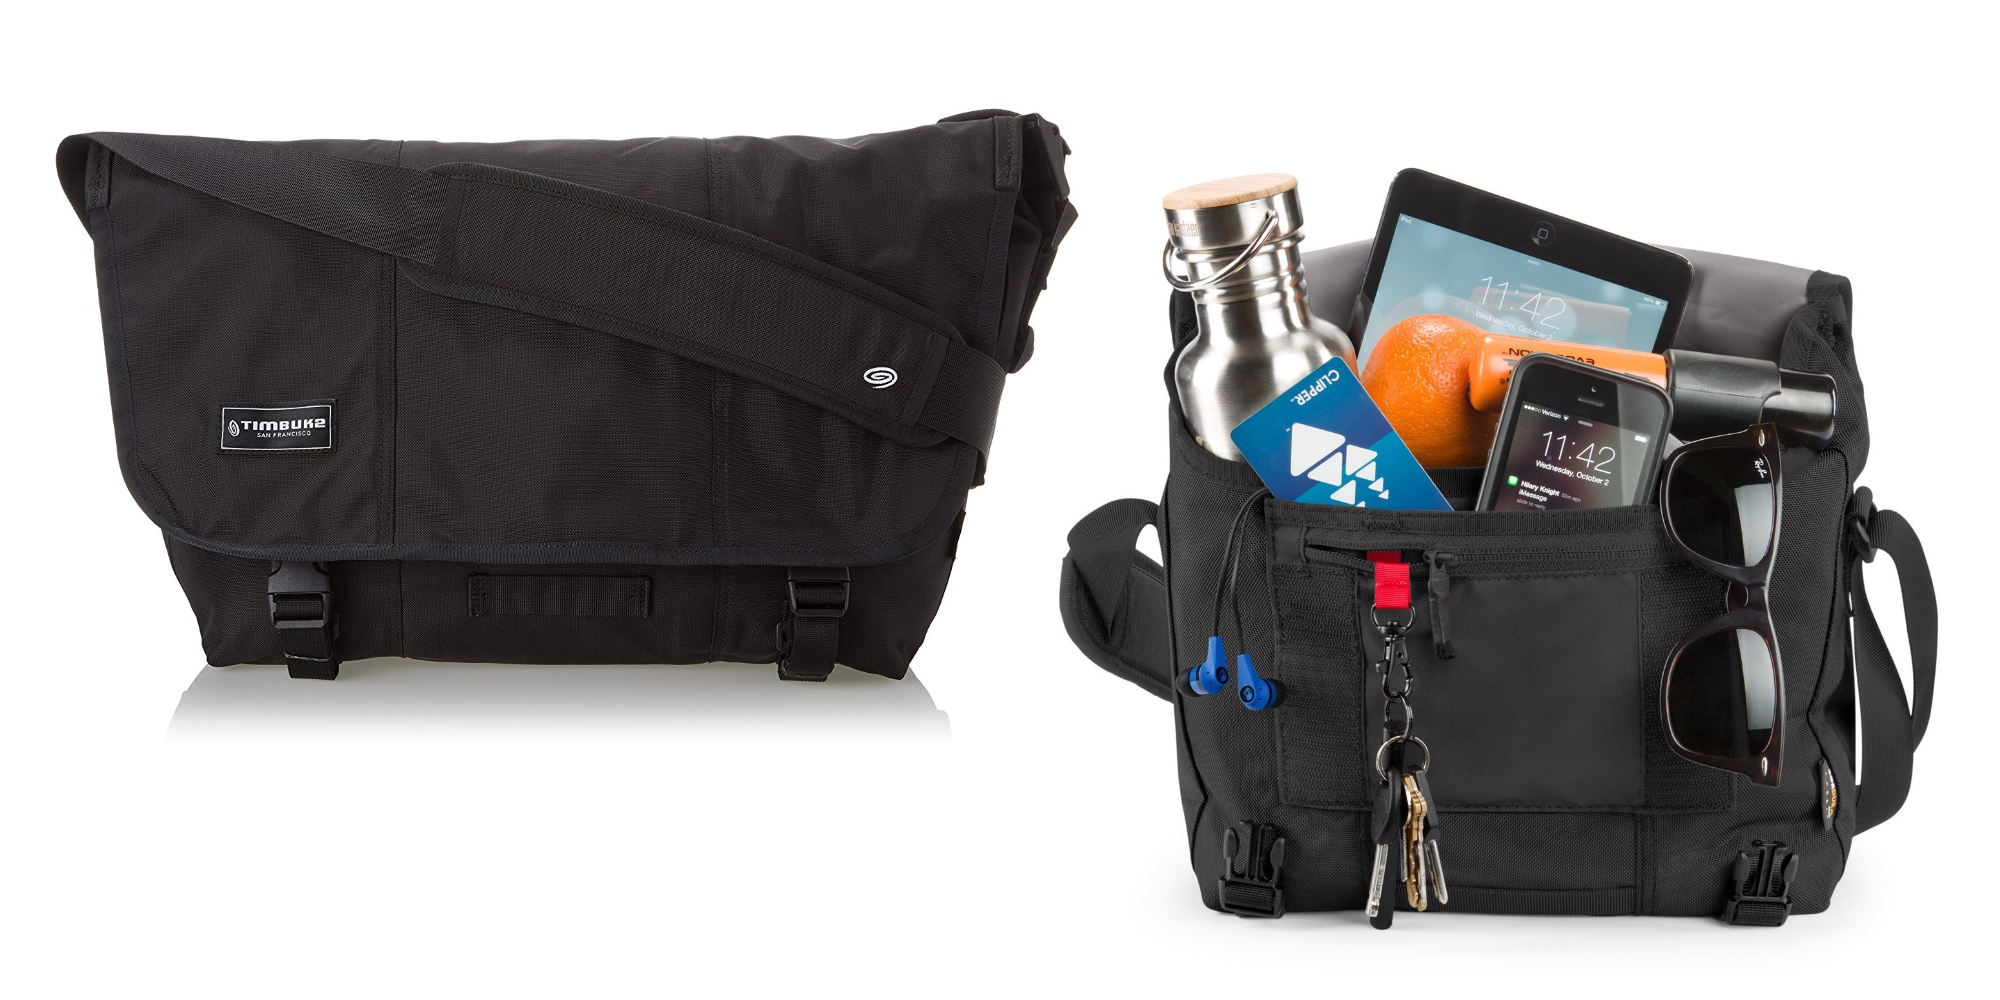 Timbuk2 S Classic Messenger Bag Is Down To Its Lowest Price In Months At 50 Shipped Save 9to5toys